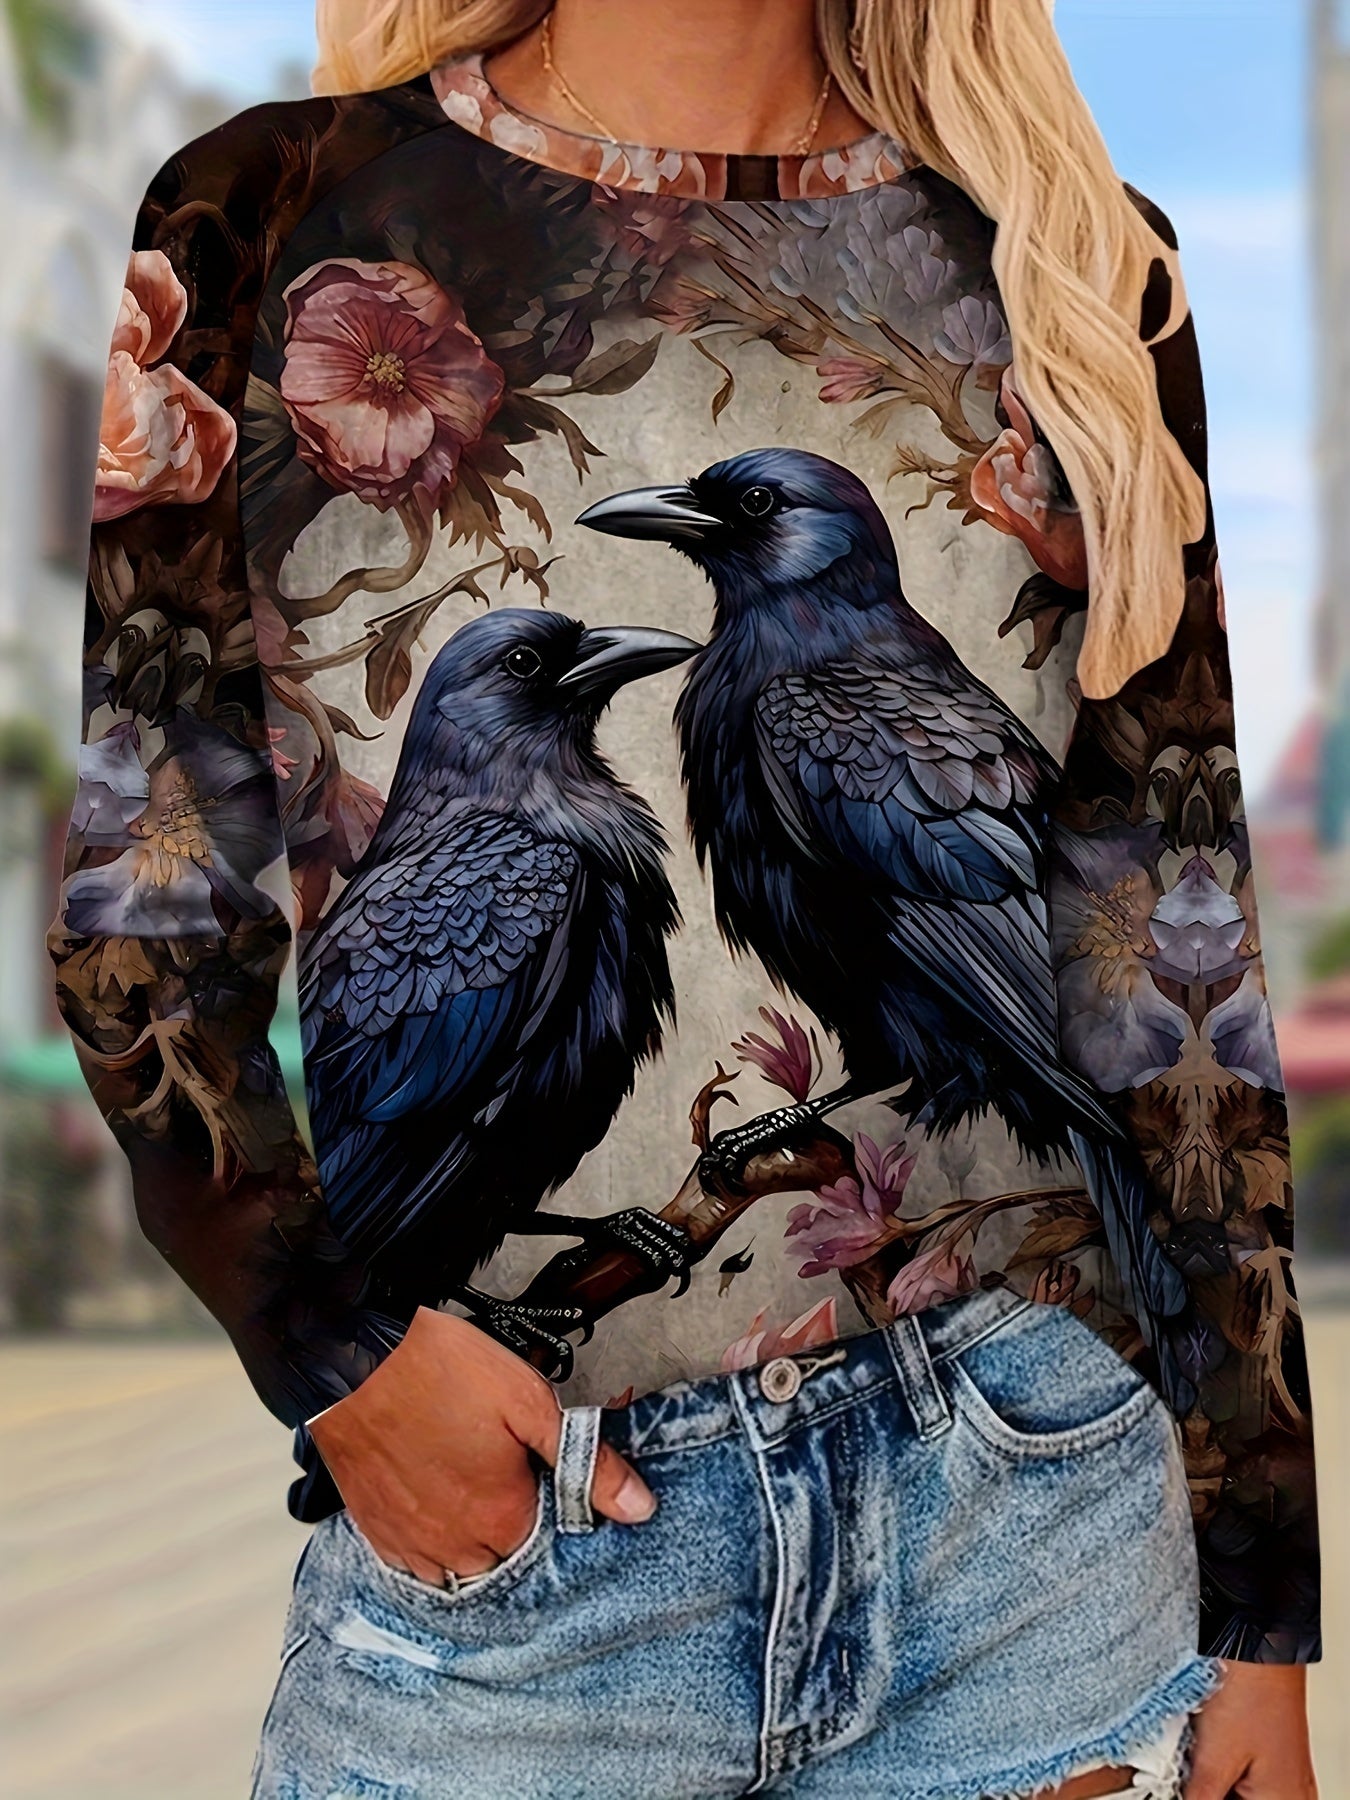 Person wearing a Maramalive™ Birds & Floral Print T-shirt, Vintage Crew Neck Long Sleeve T-shirt, Women's Clothing, paired with casual denim shorts.